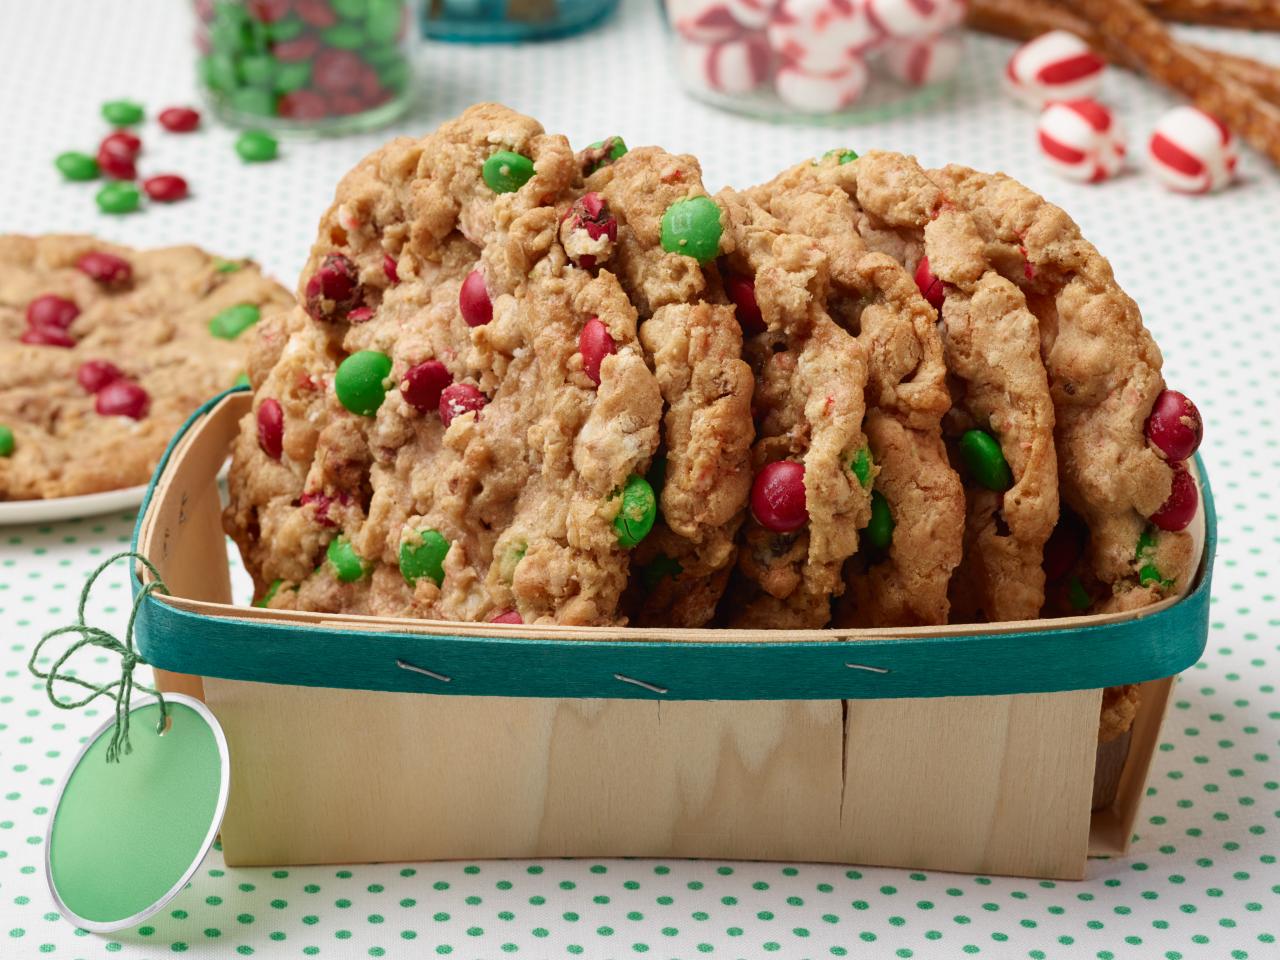 https://food.fnr.sndimg.com/content/dam/images/food/fullset/2016/9/20/1/FNK_Holiday-Monster-Cookies-with-Tag_s4x3.jpg.rend.hgtvcom.1280.960.suffix/1474401761462.jpeg